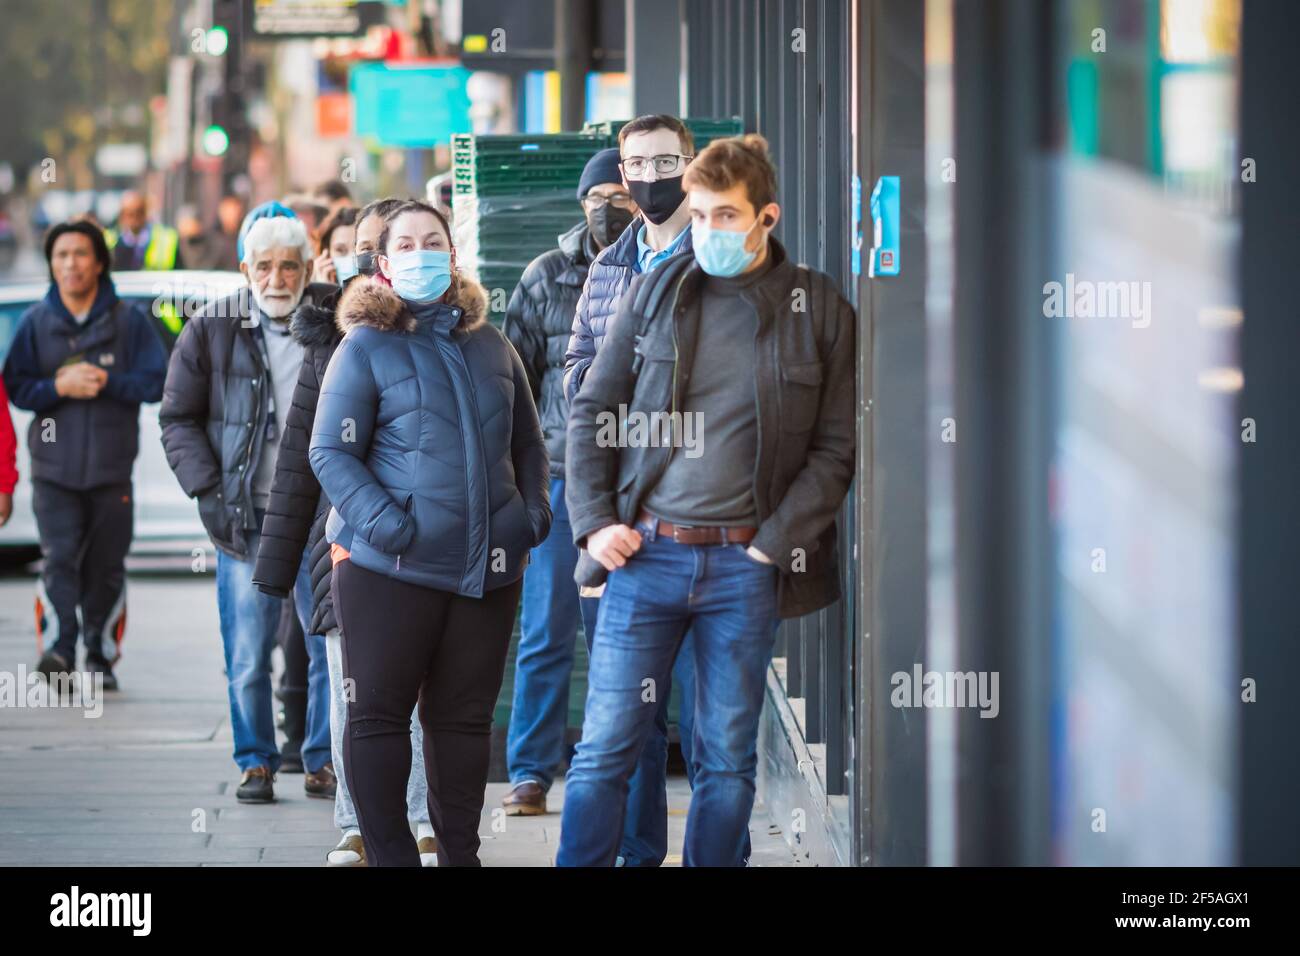 London, UK - 26 February, 2021 - Customers with face masks queueing outside the shop during the COVID-19 pandemic Stock Photo